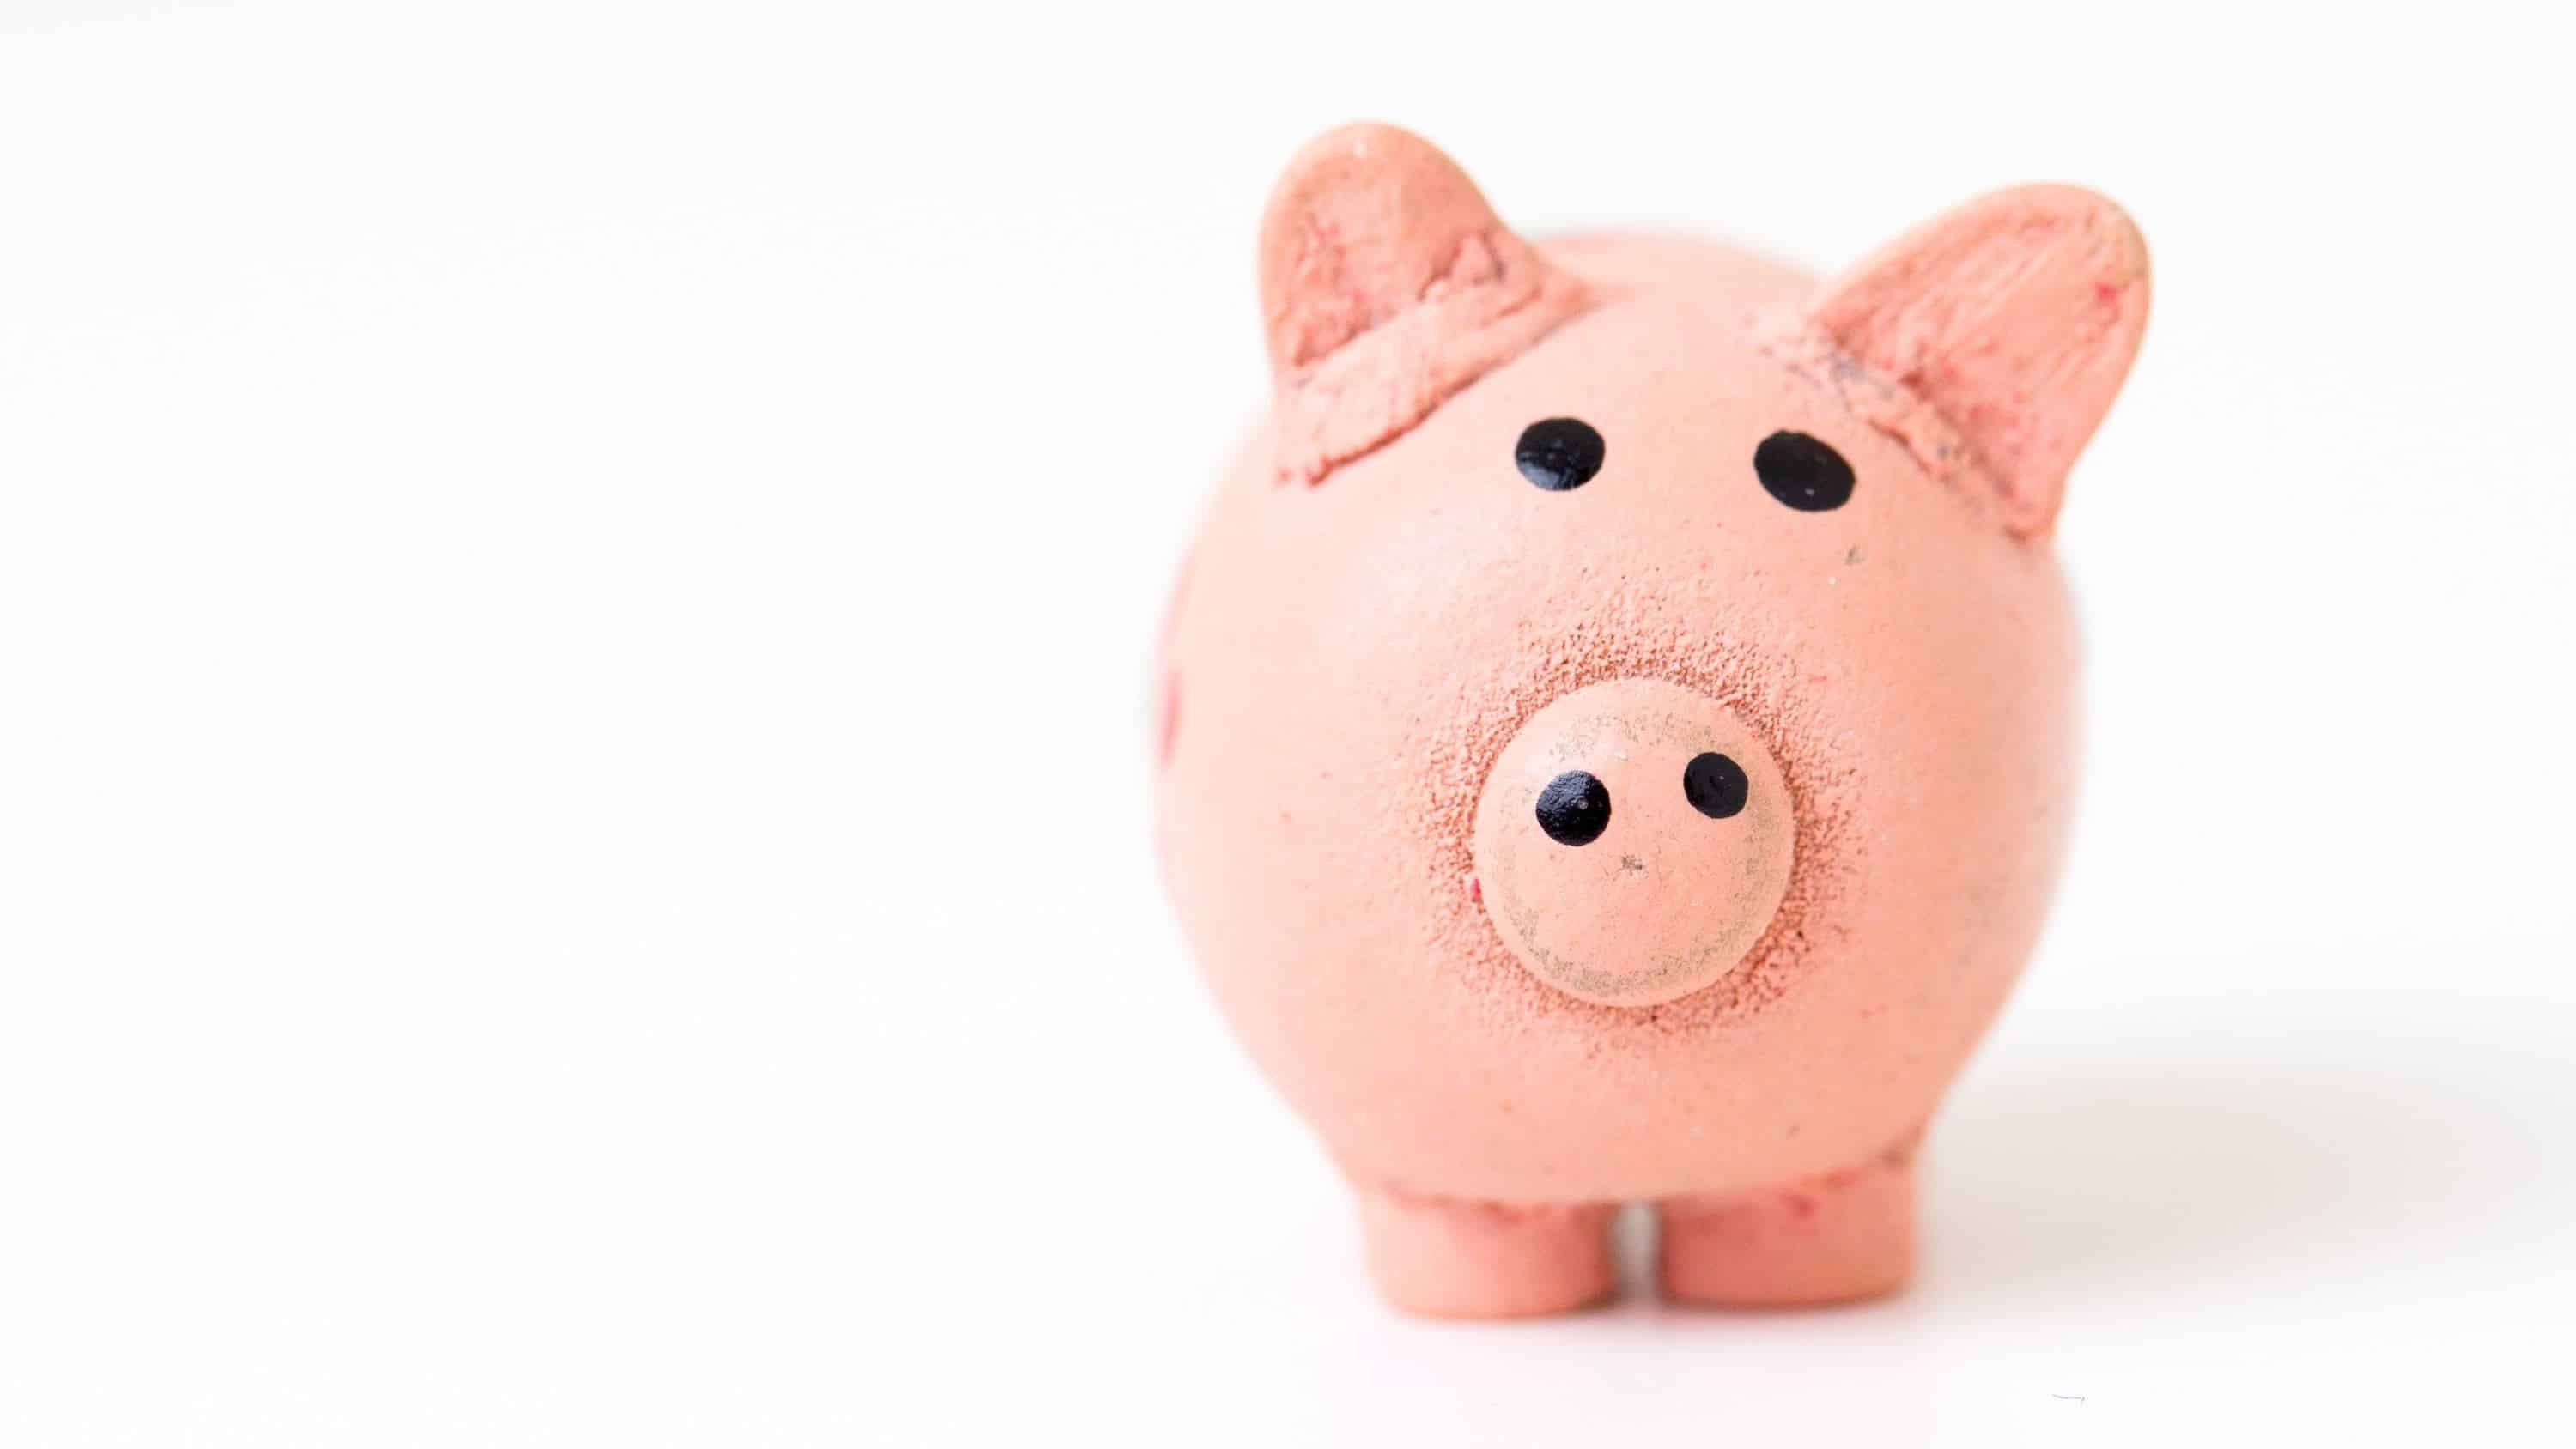 Pink plush looking piggy bank against white background